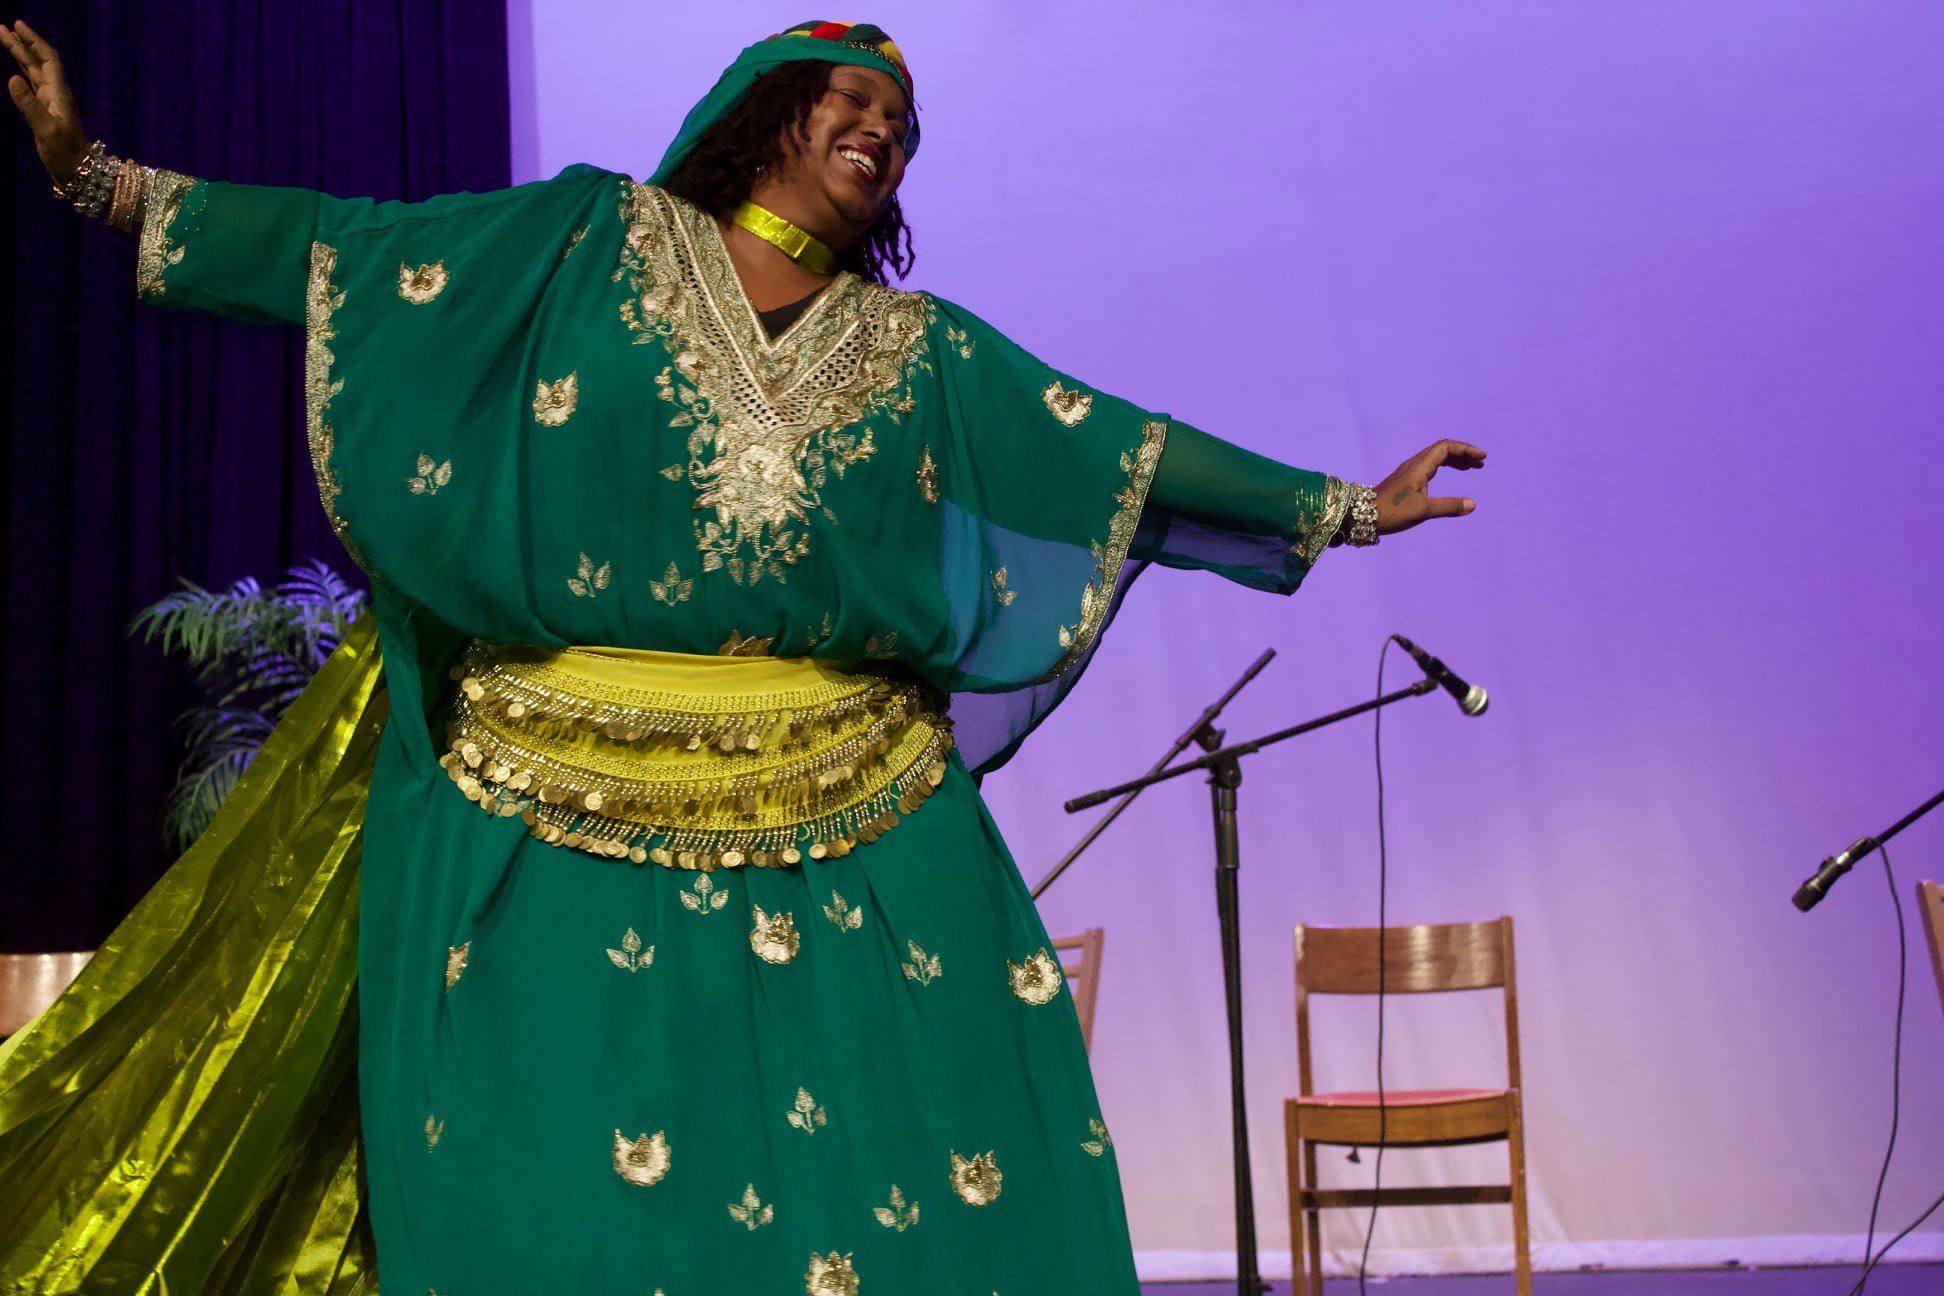 In a last performance, a woman in a green dress captivates the stage.